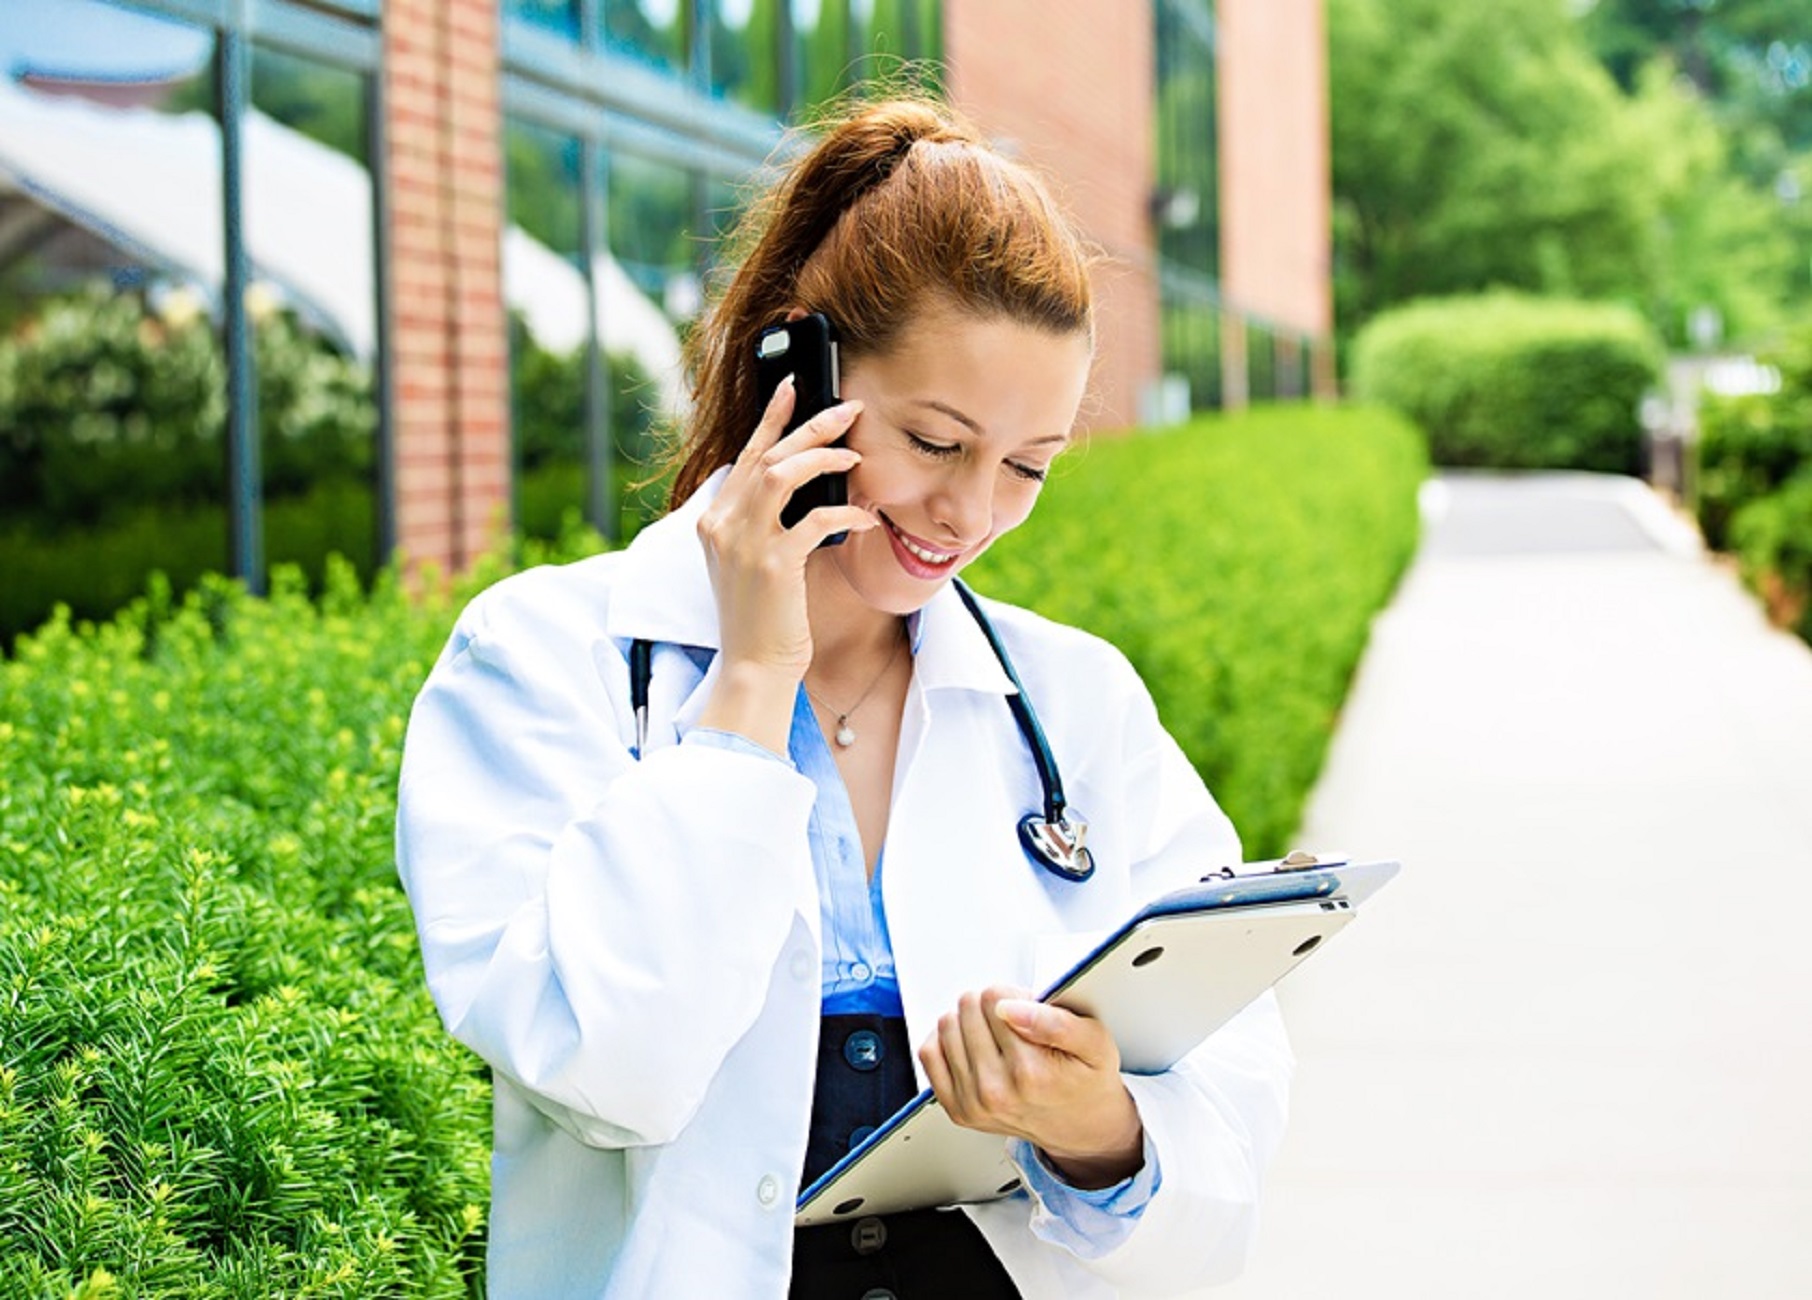 Smiling female doctor on phone